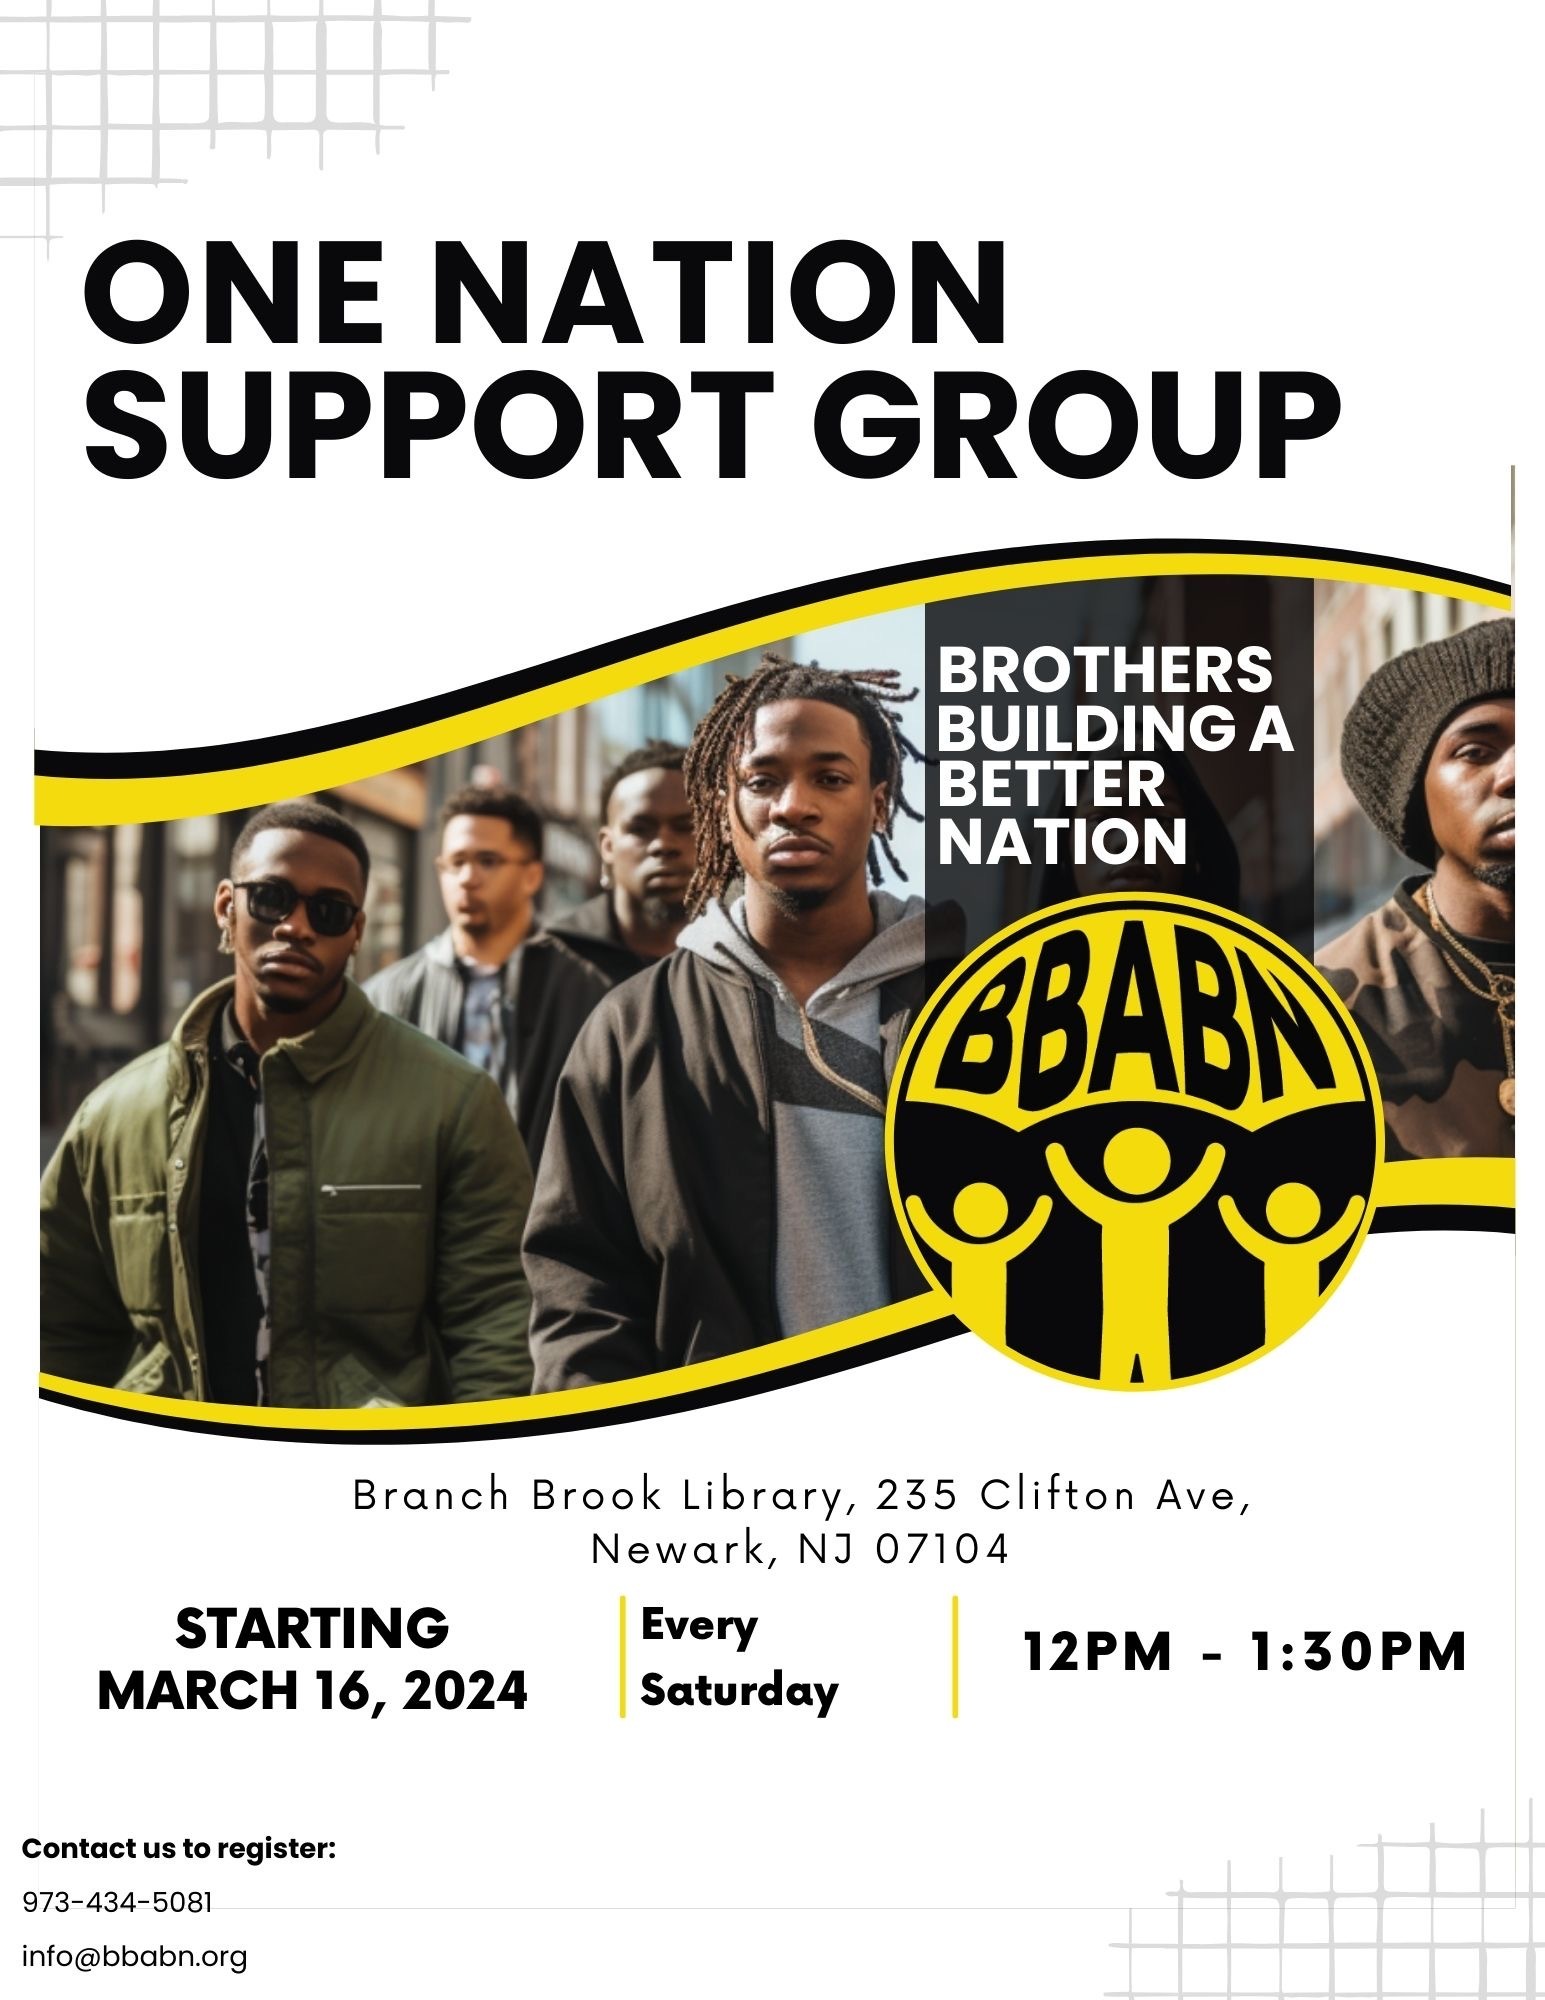 One Nation Support Group